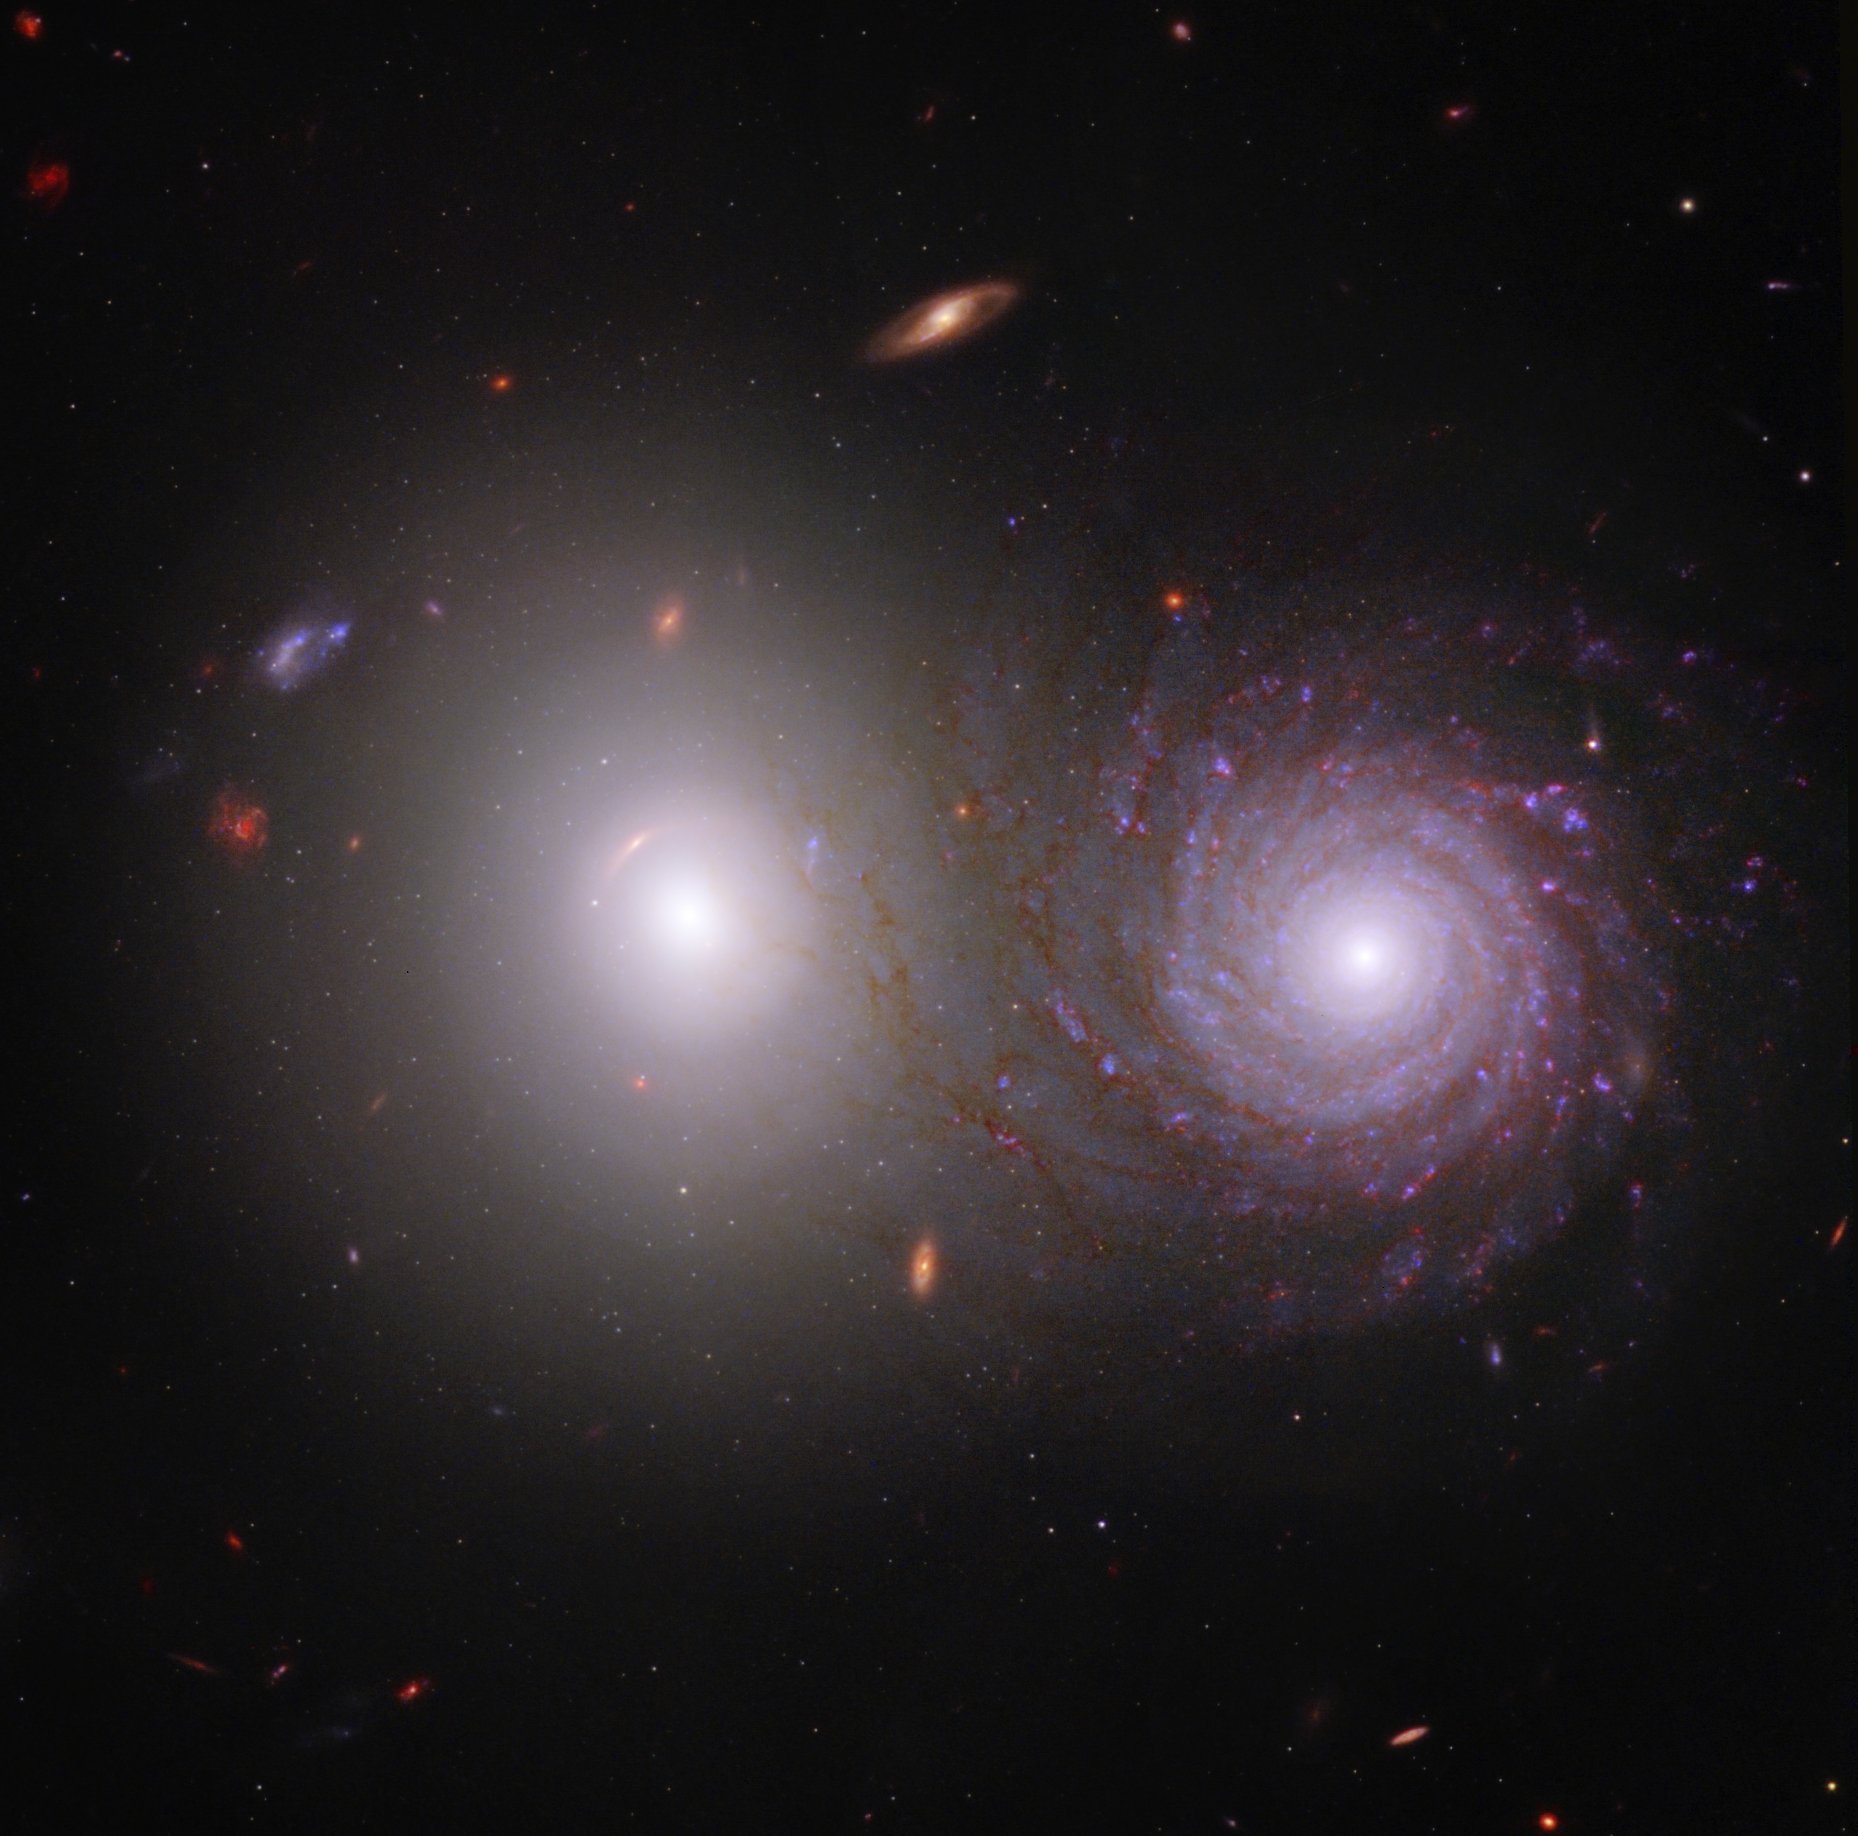 Astronomers merge Hubble's ultraviolet and visible-light view with Webb’s infrared vision: Check out this stunning image of galaxy pair VV 191